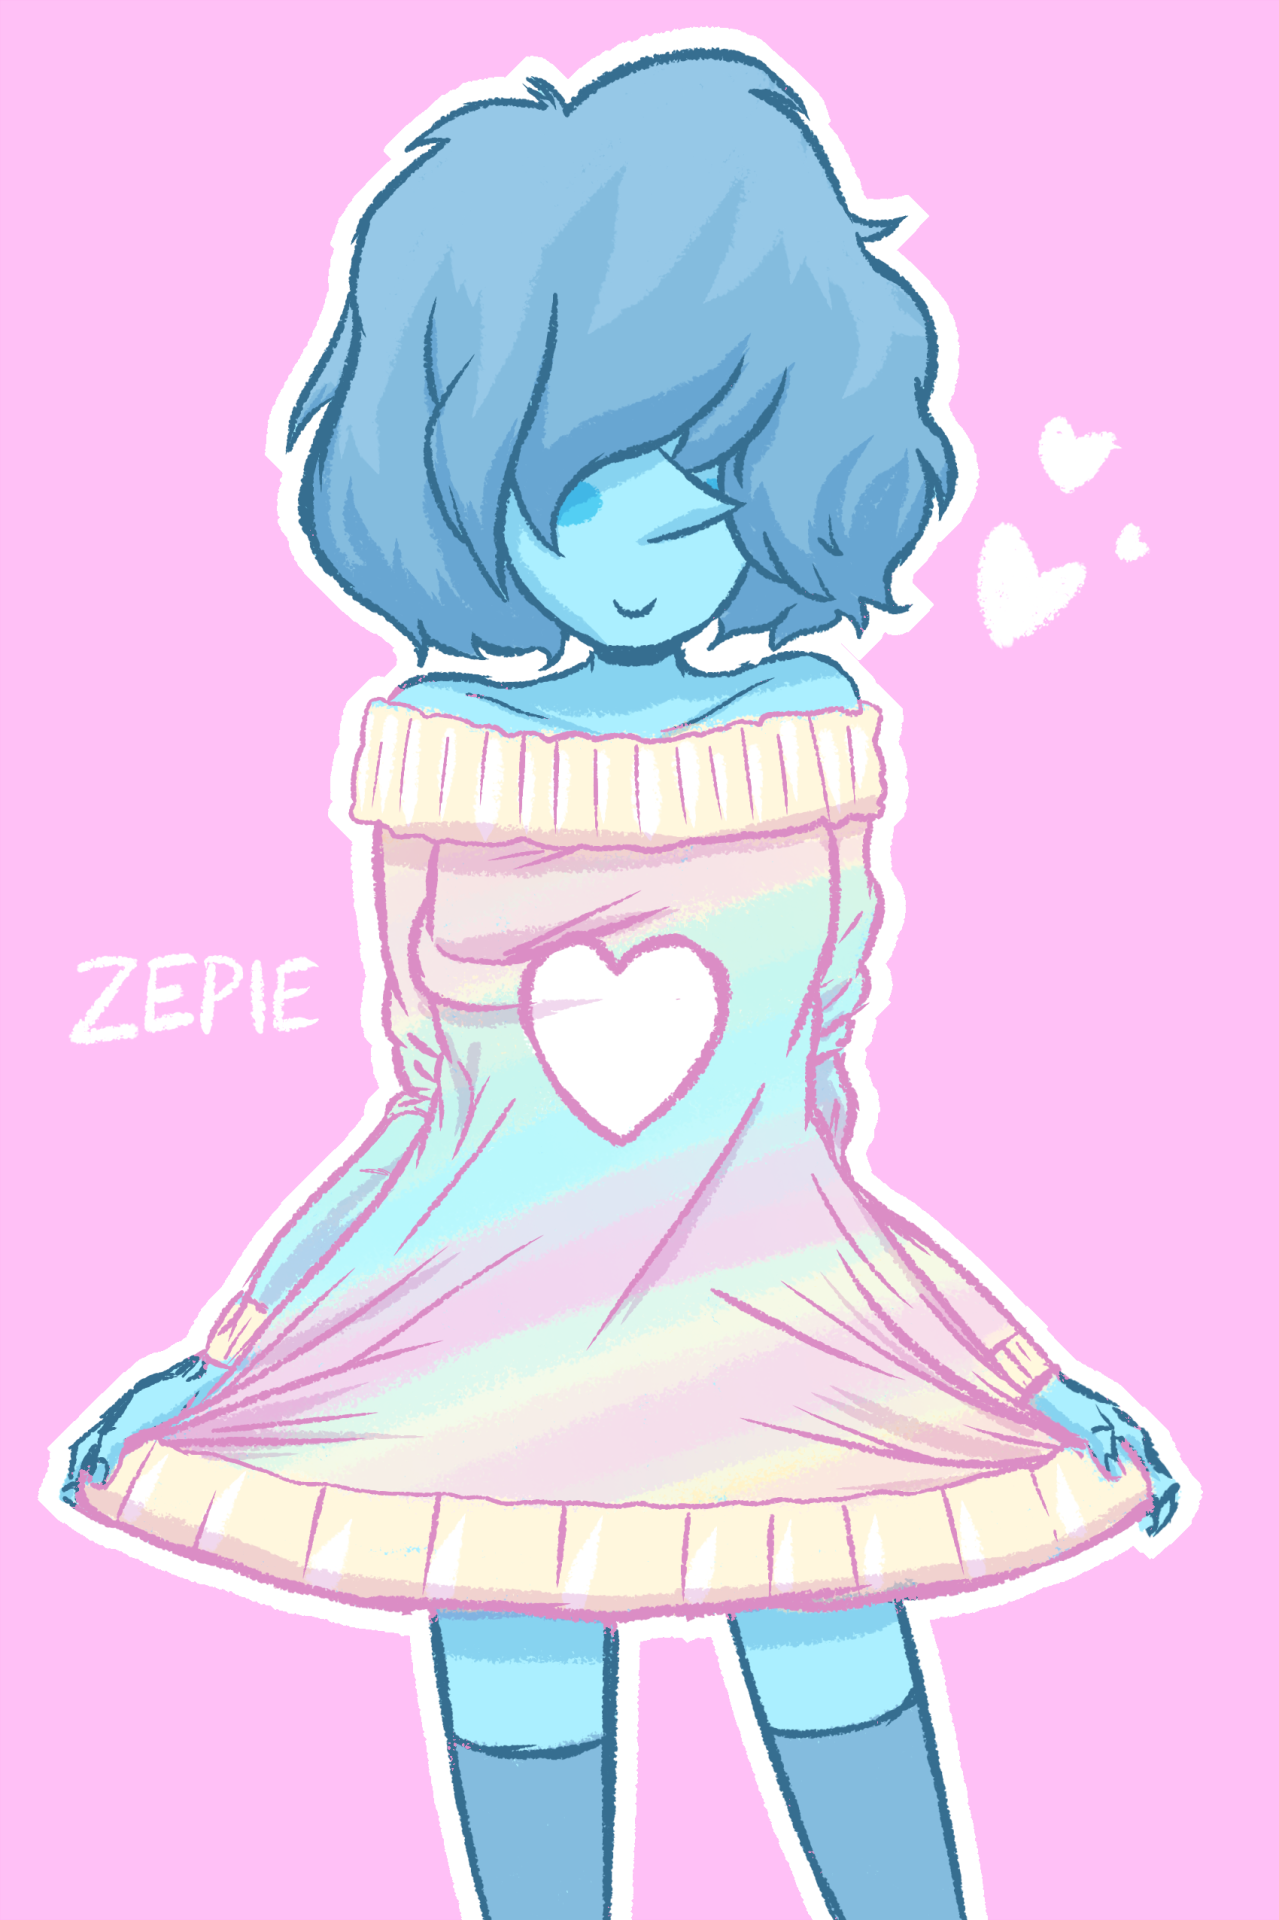 blxepearlofficial said: 23 Blue Pearl! Answer: 23- Pastel Sweater omggggggg